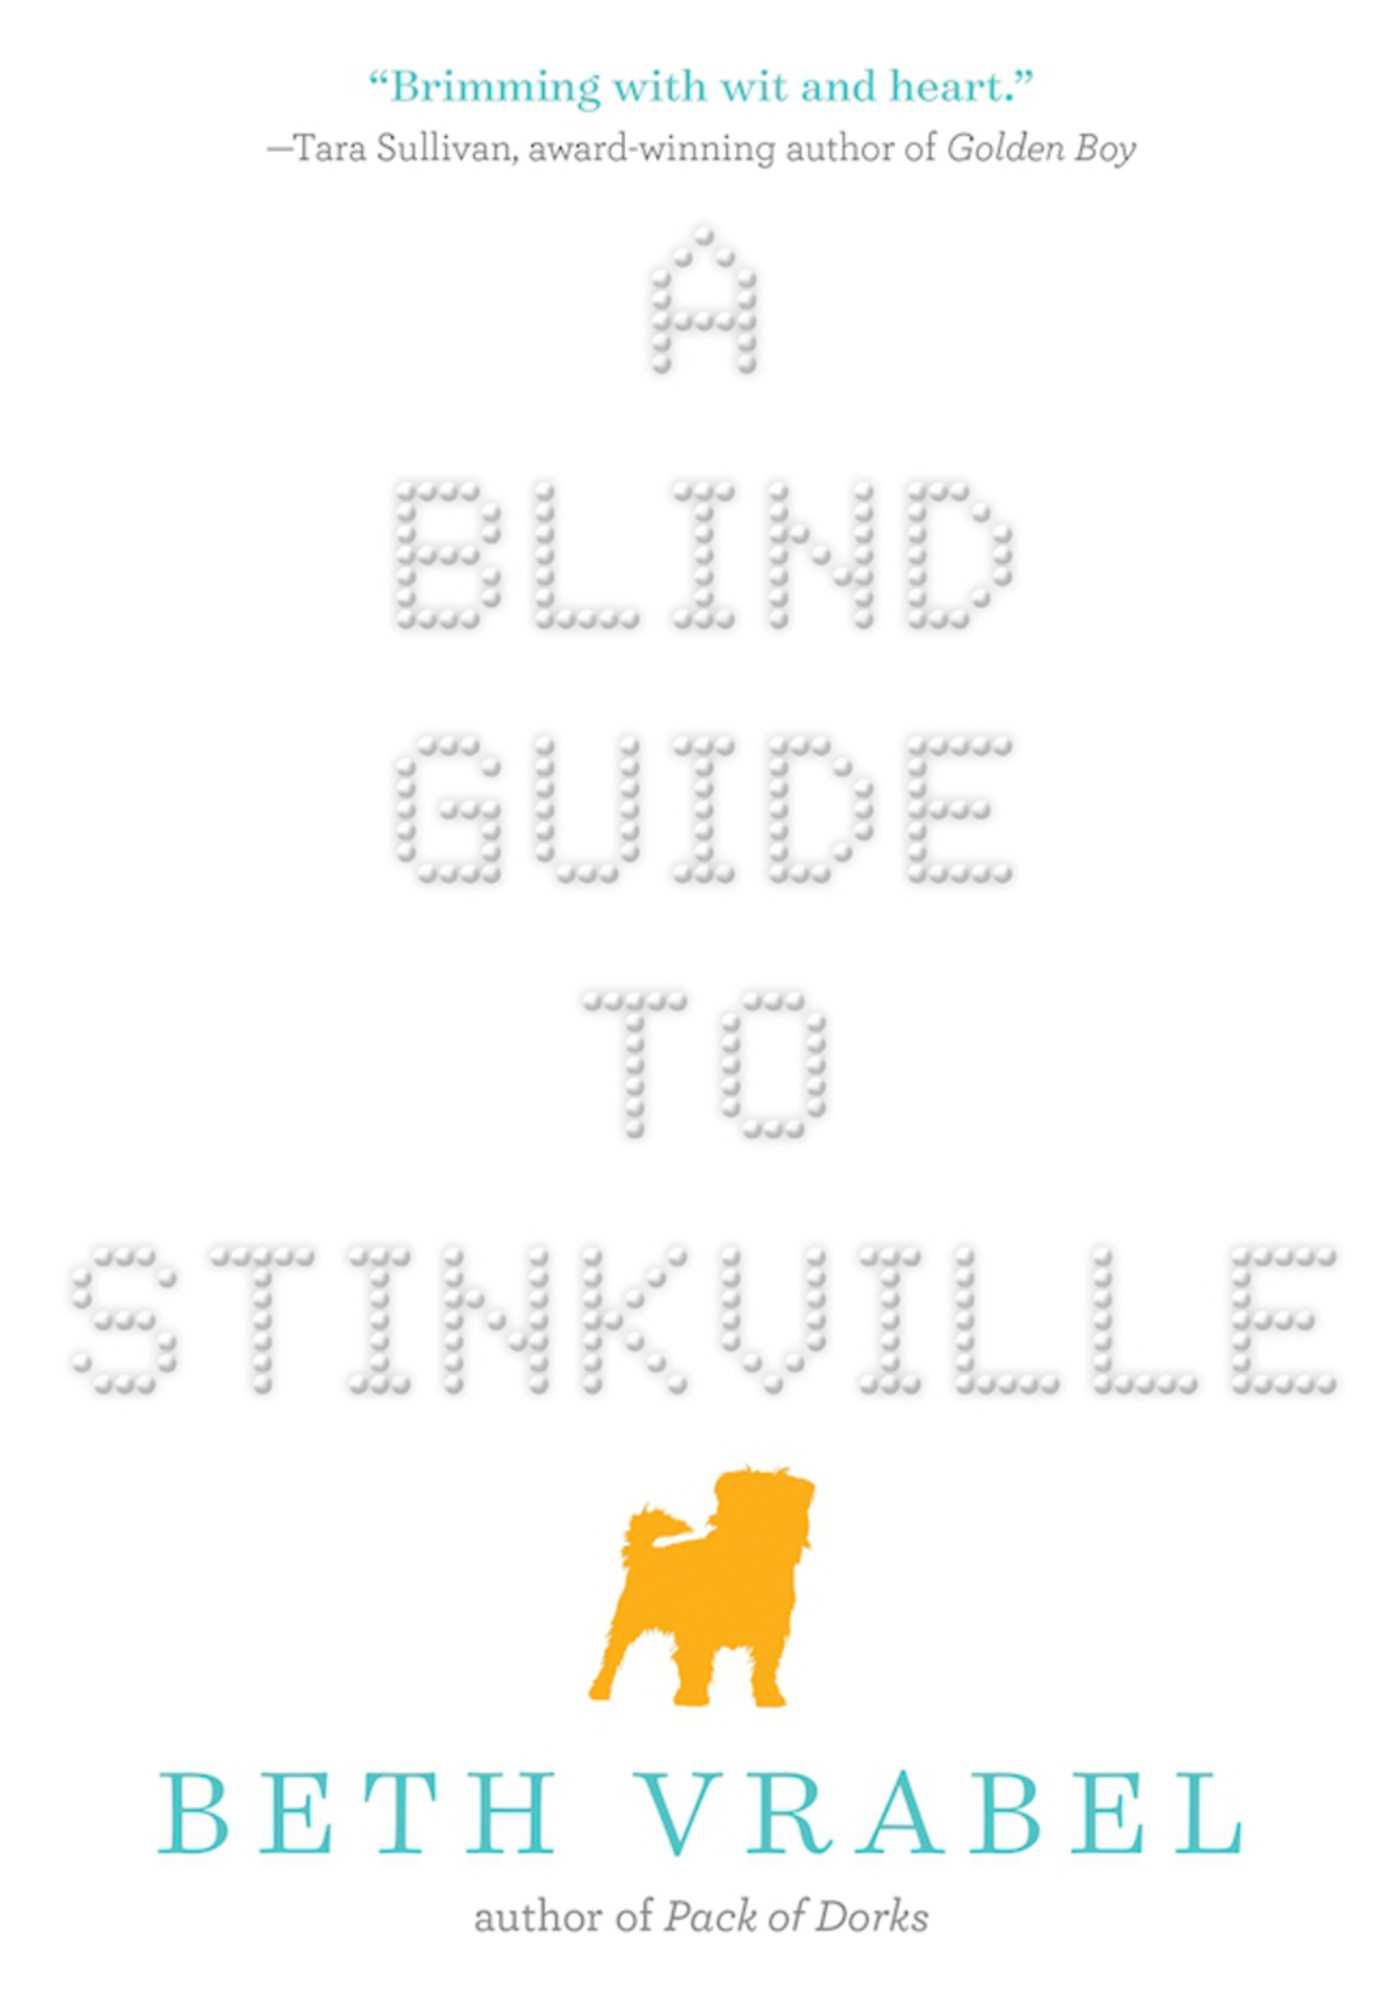 Book cover of A Blind Guide to Stinkville